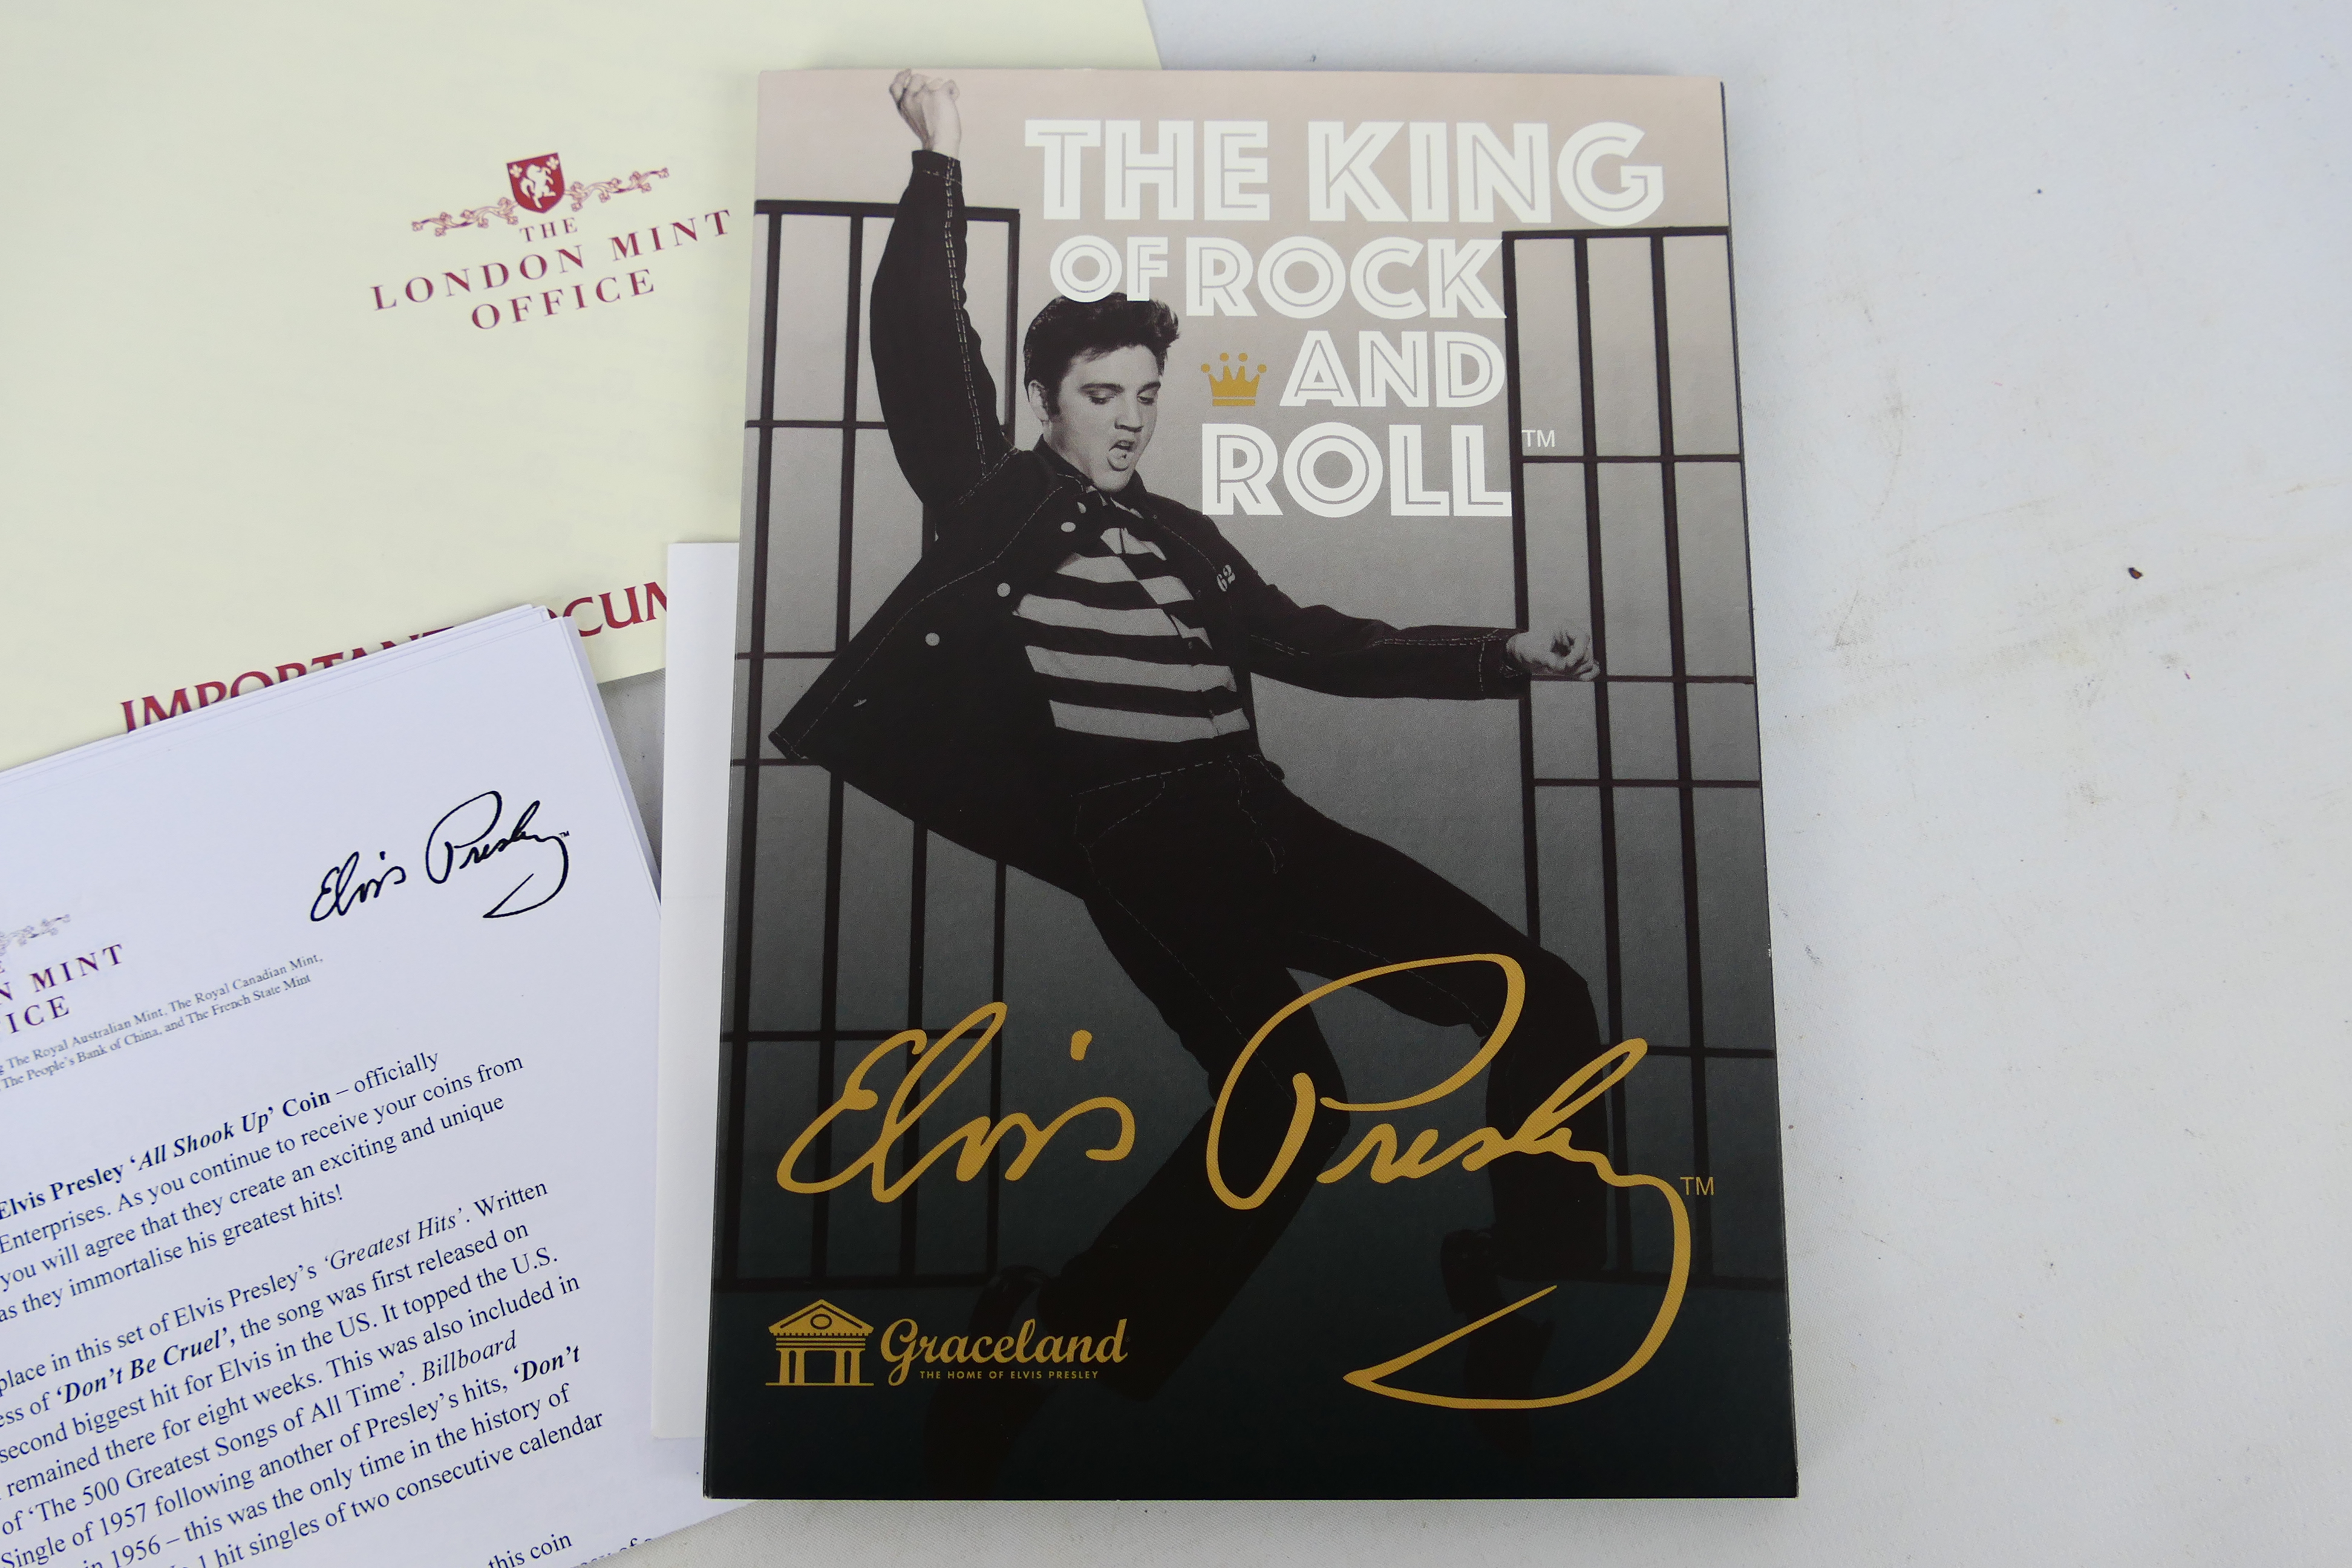 Elvis Presley - A London Mint Elvis related collector coin set, The King Of Rock And Roll, - Image 5 of 7